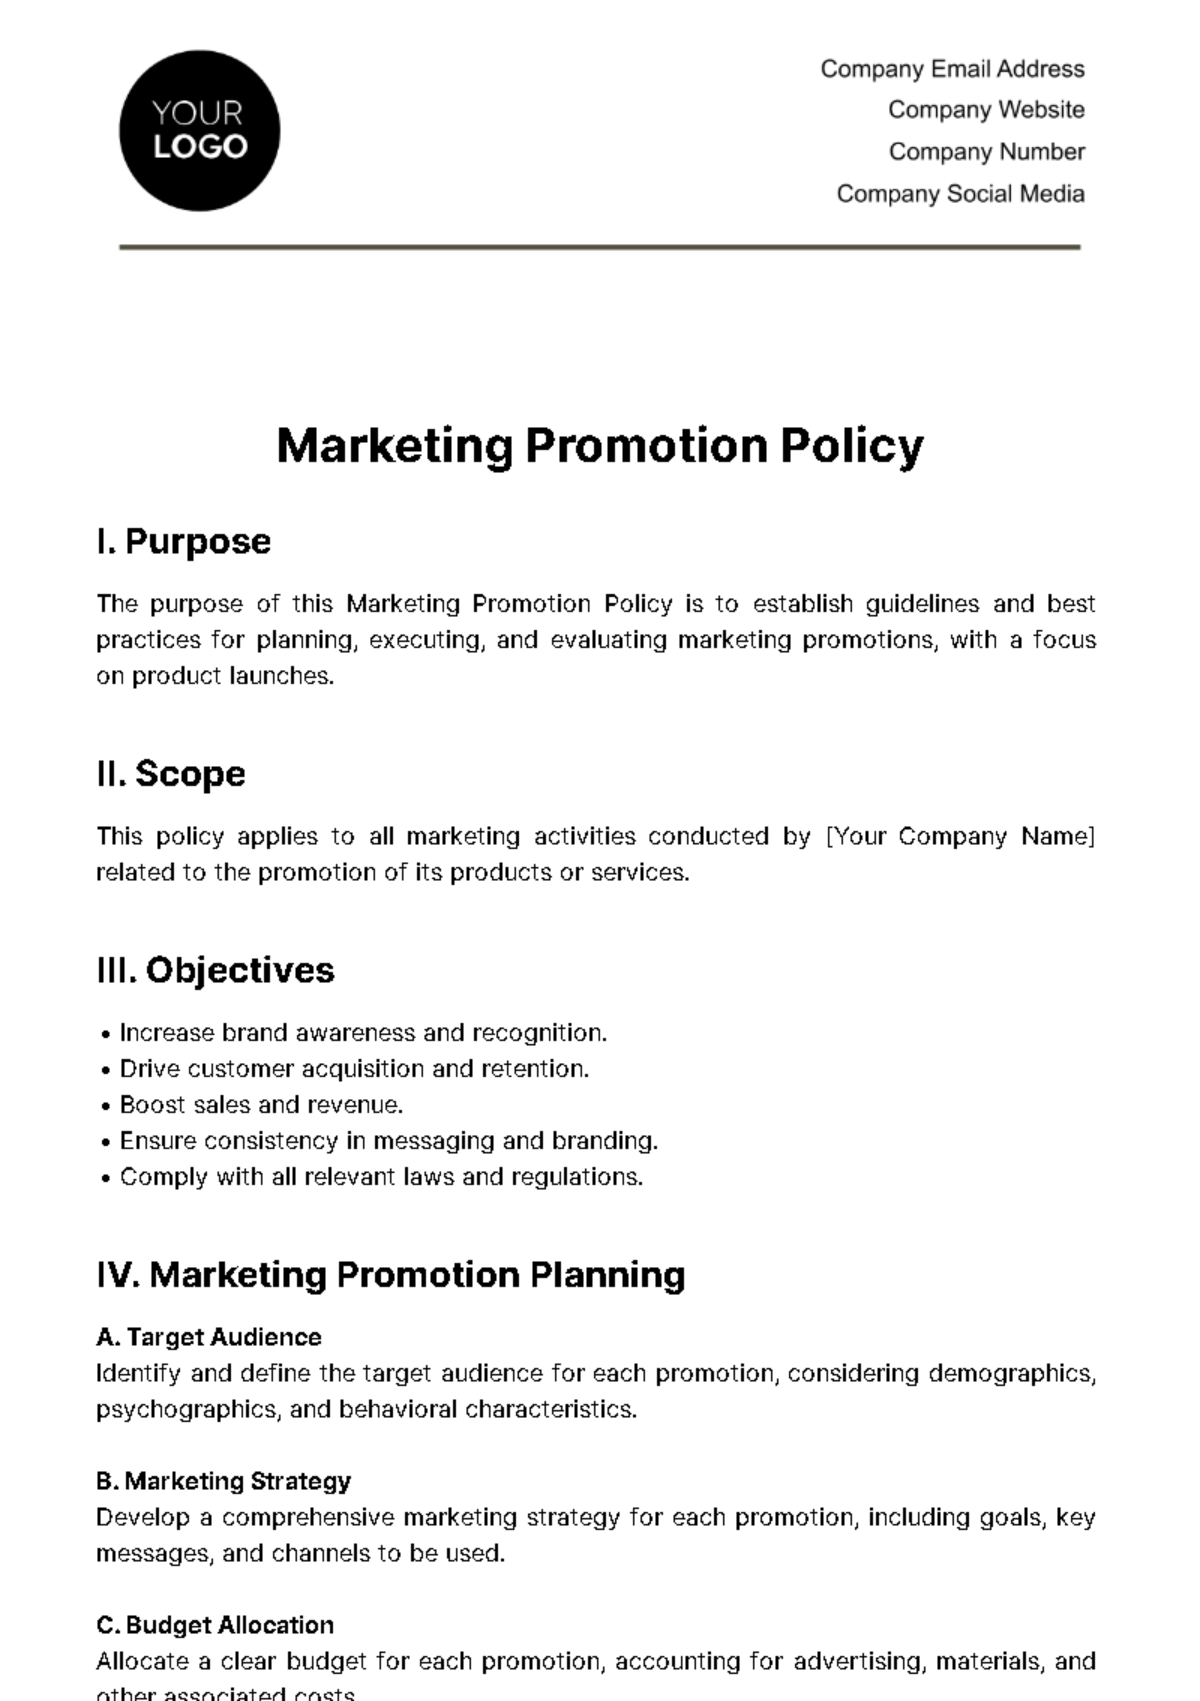 Free Marketing Promotion Policy Template